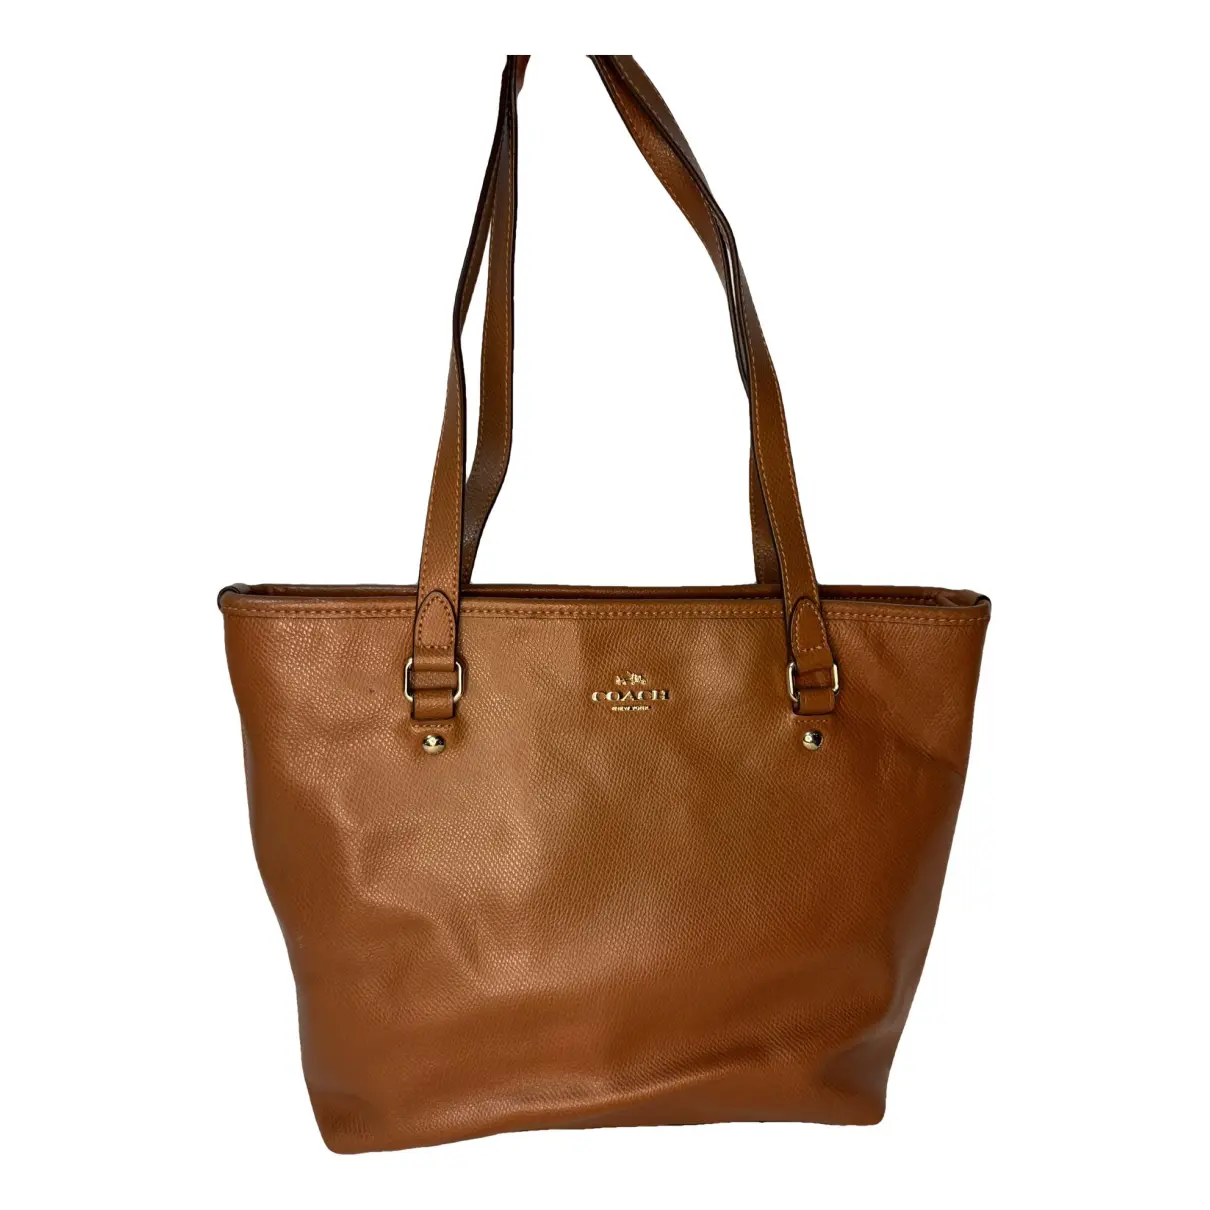 CITY ZIP TOTE leather tote